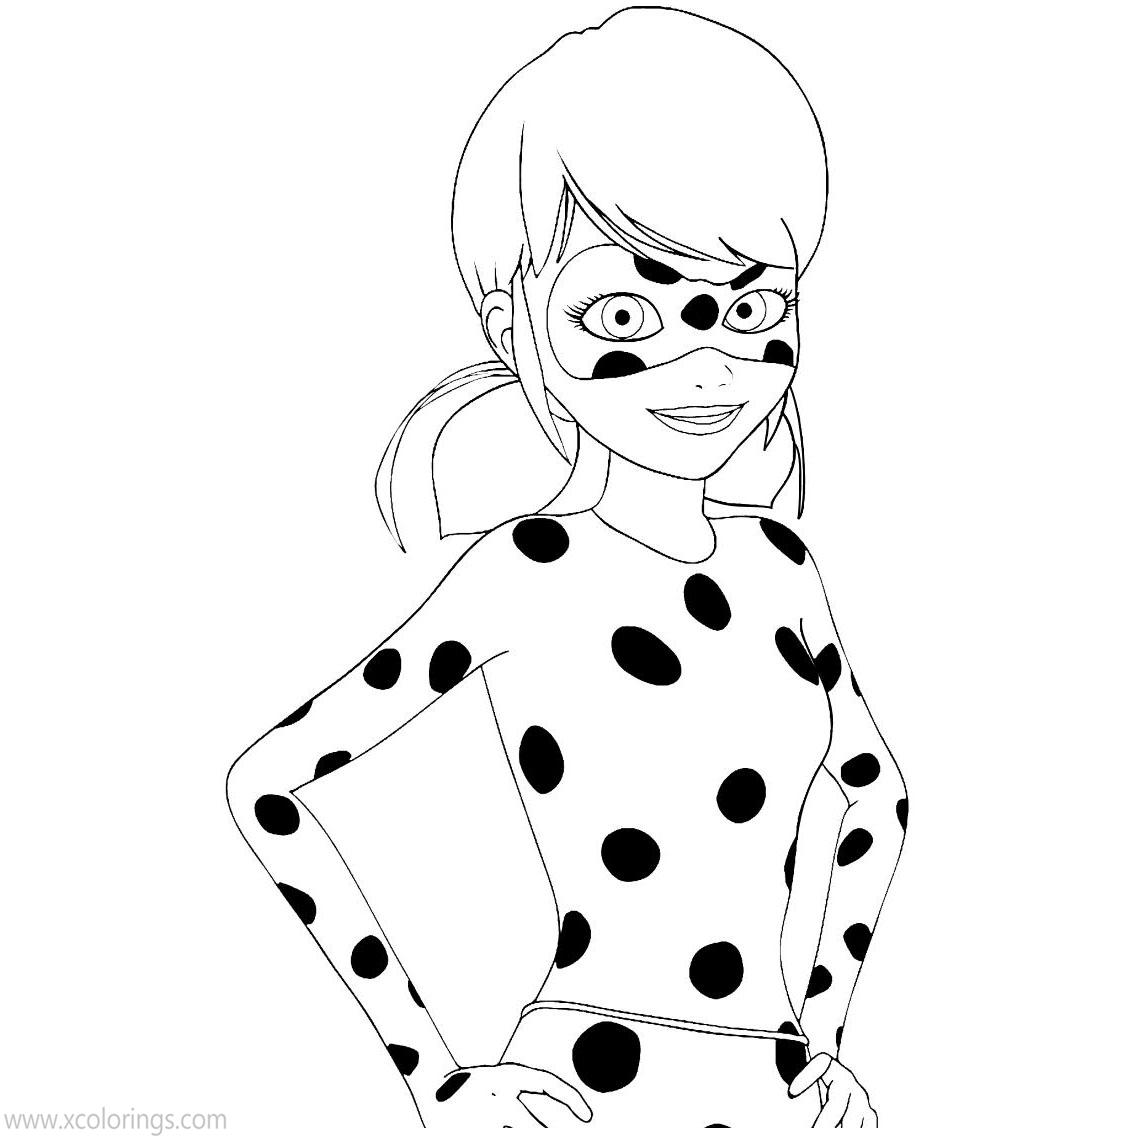 Free Miraculous Ladybug Coloring Pages Free to Print printable